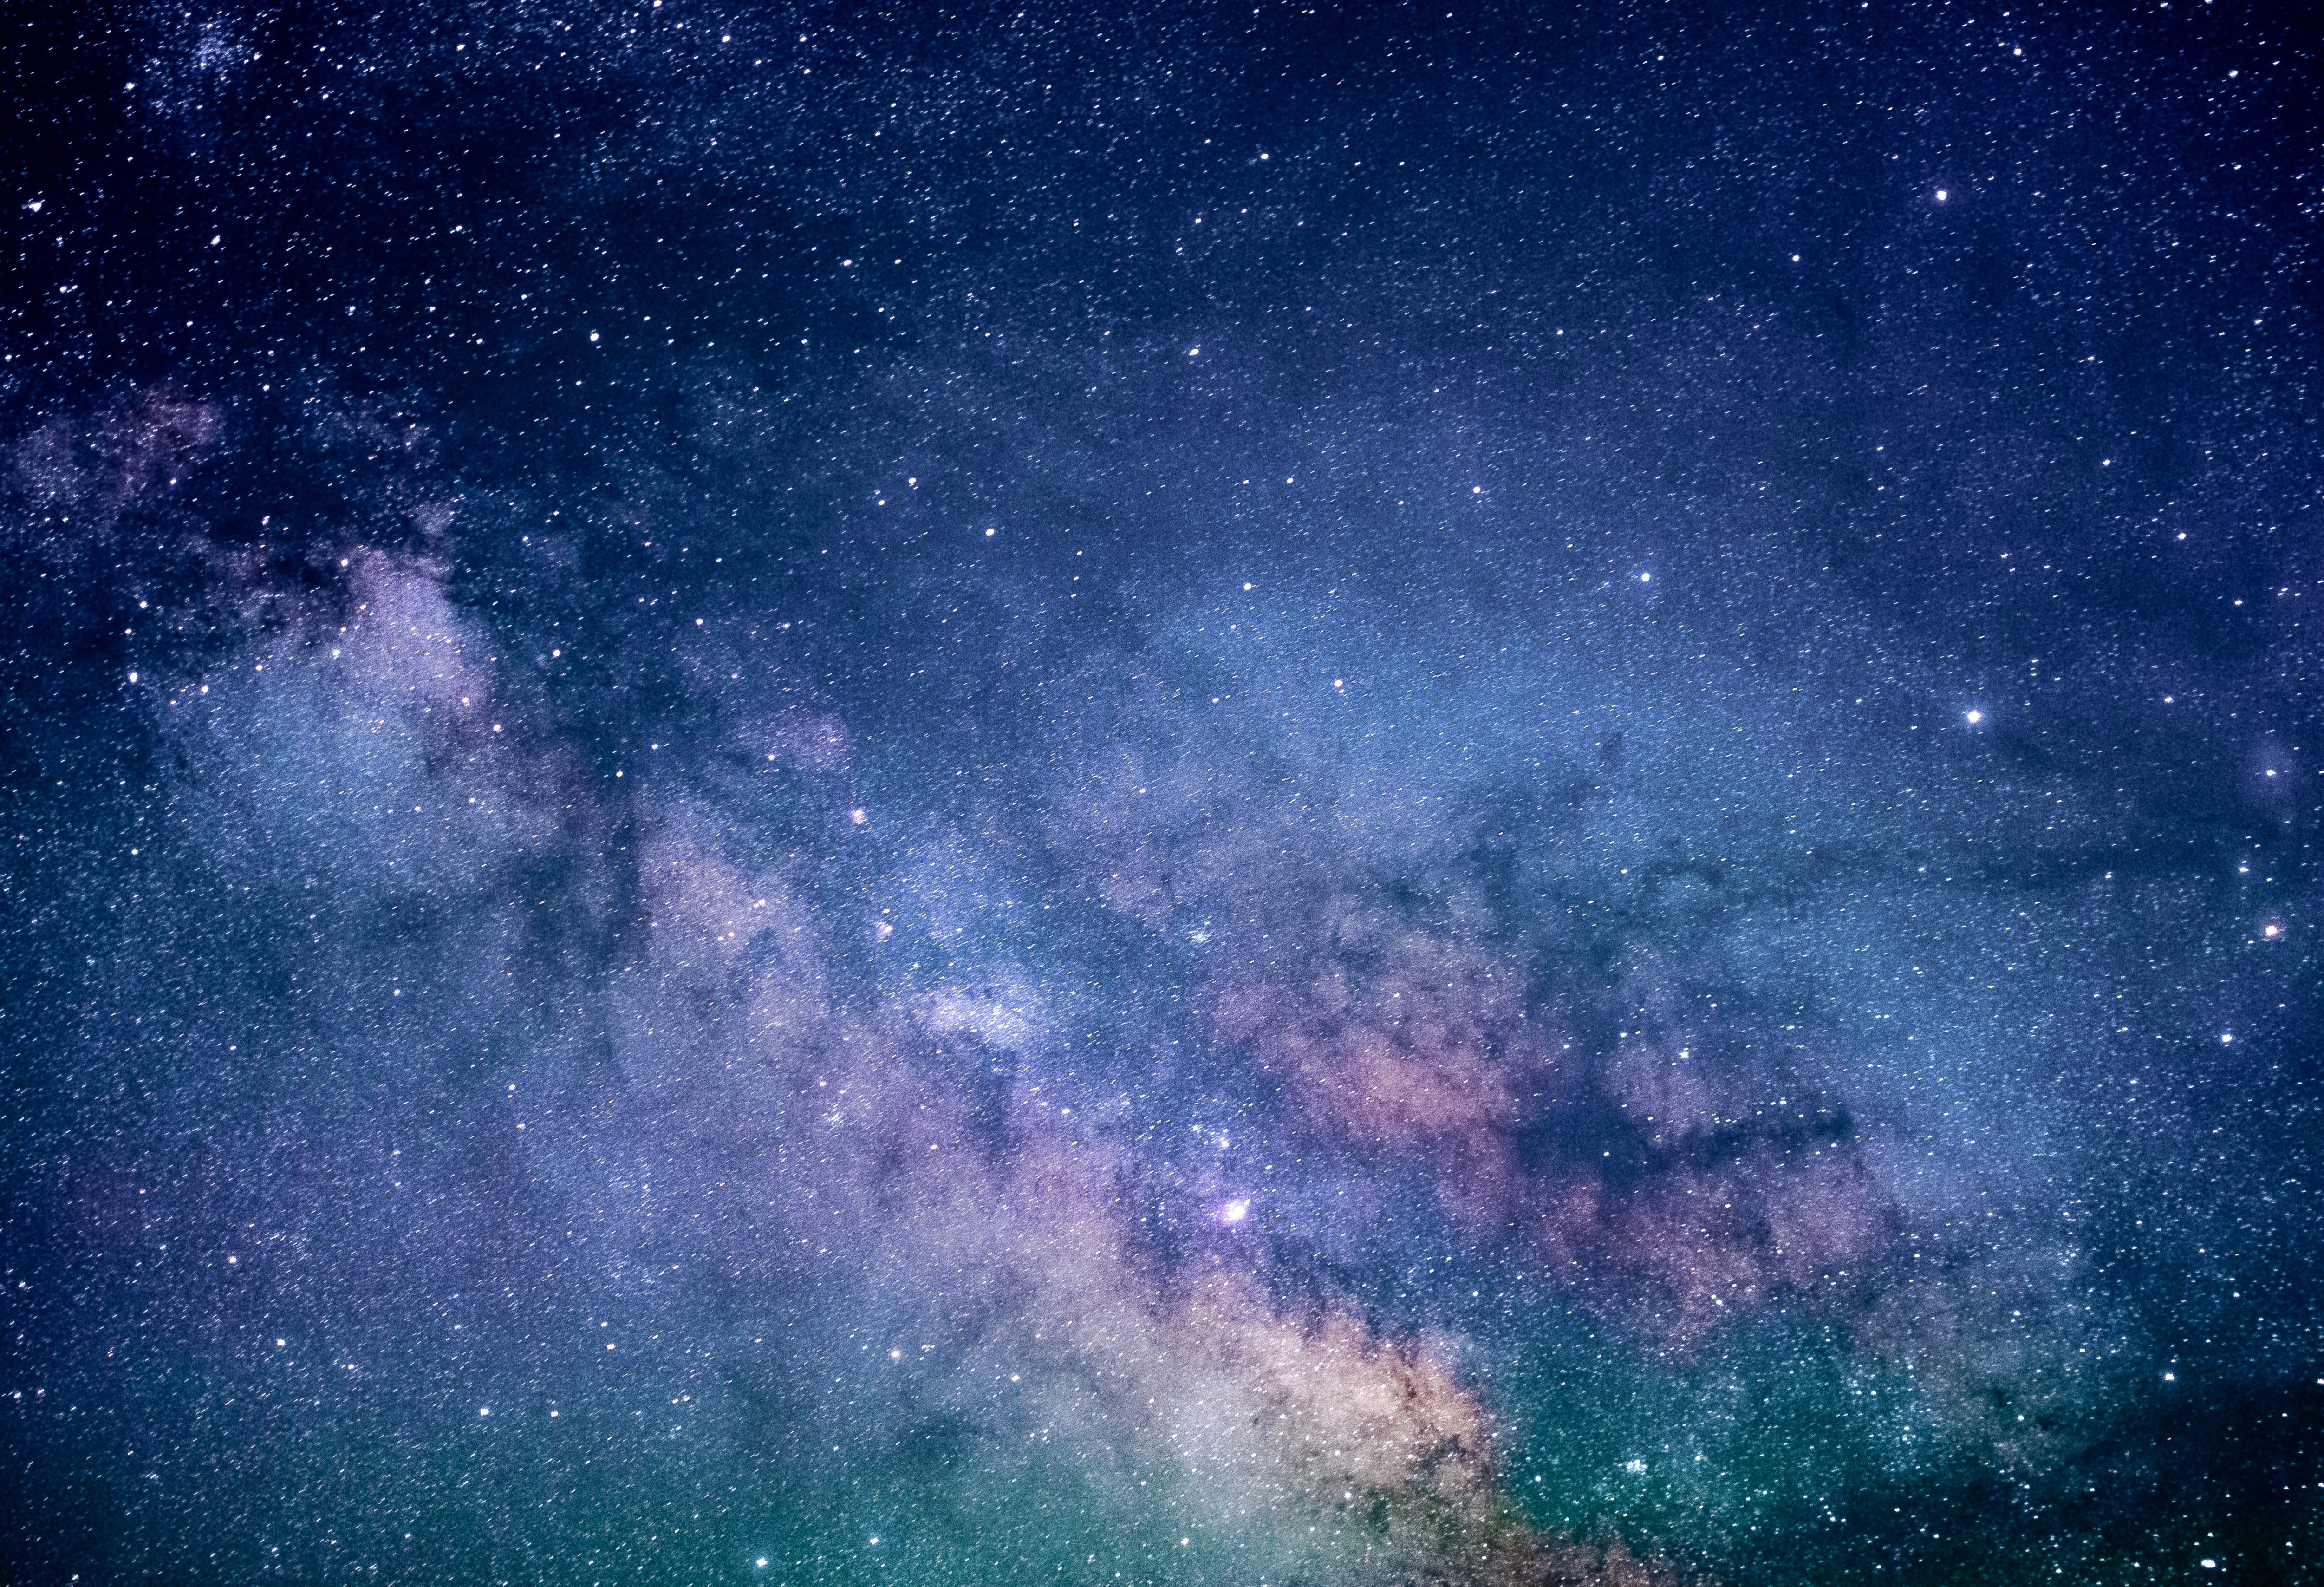 HD wallpaper, Milky Way, Universe, Astronomy, 5K, Night Time, Outer Space, Galaxy, Starry Sky